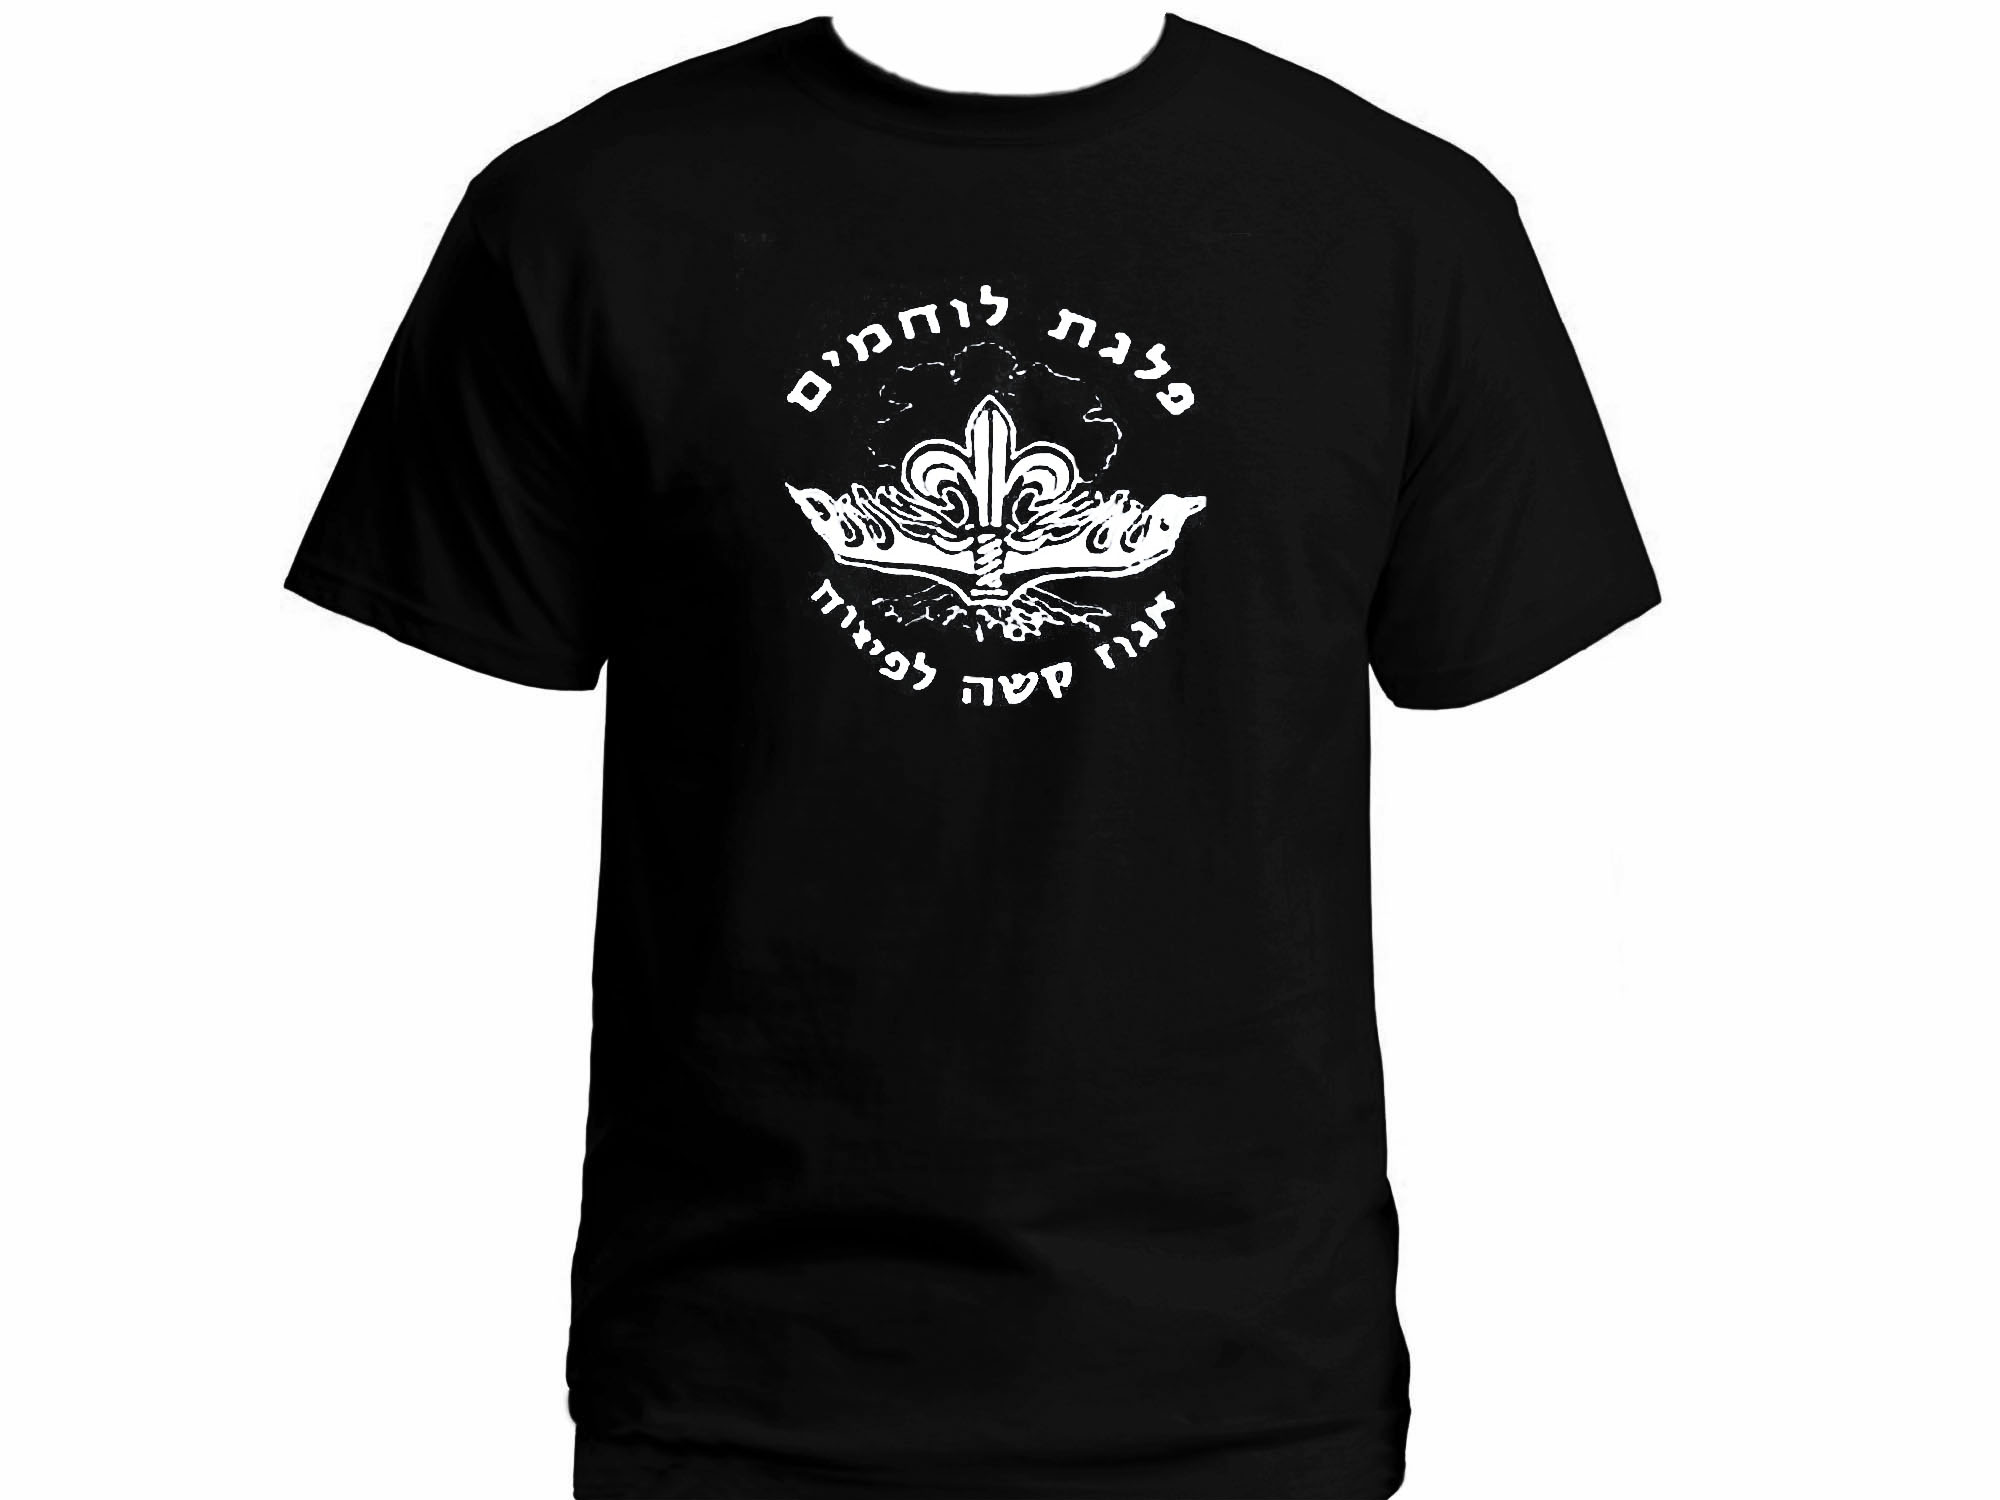 Israel special forces Egoz customized t-shirt